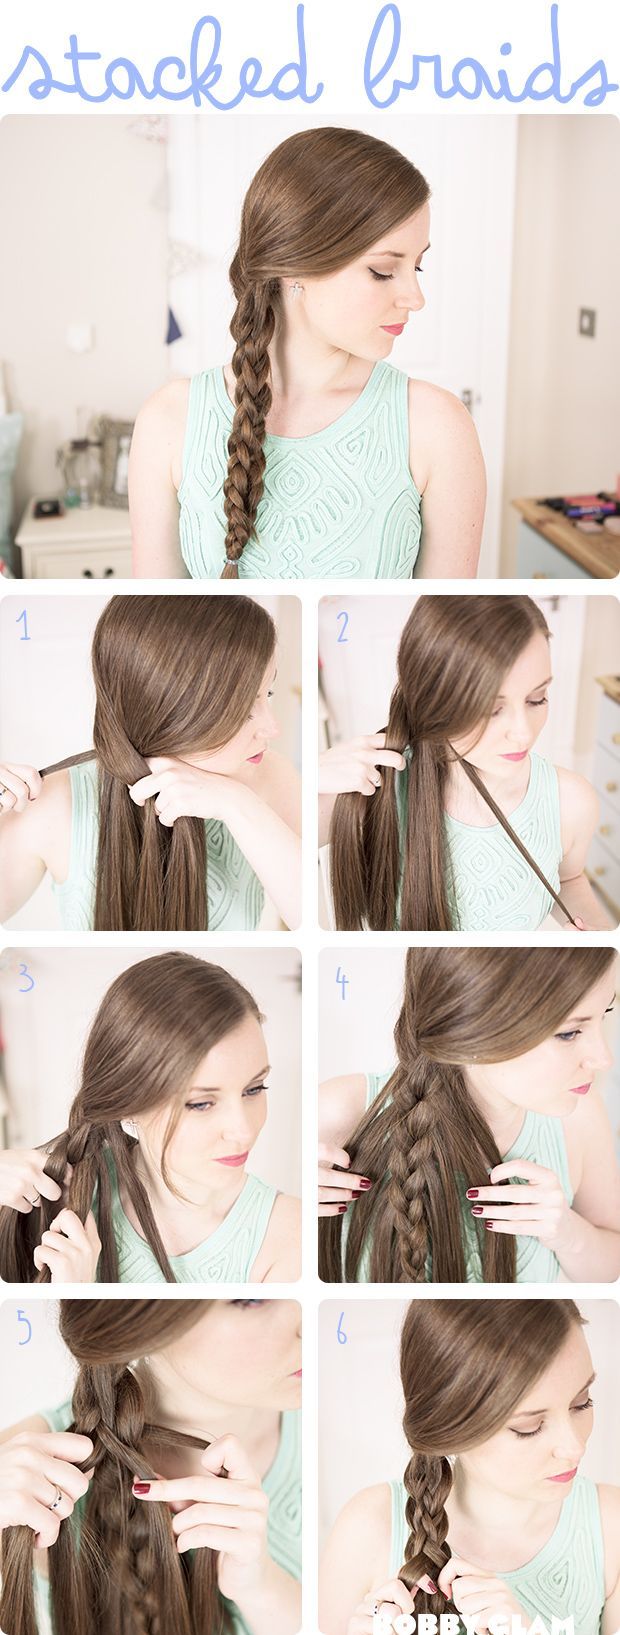 Stacked Braids: Need to try this; looks pretty cool!